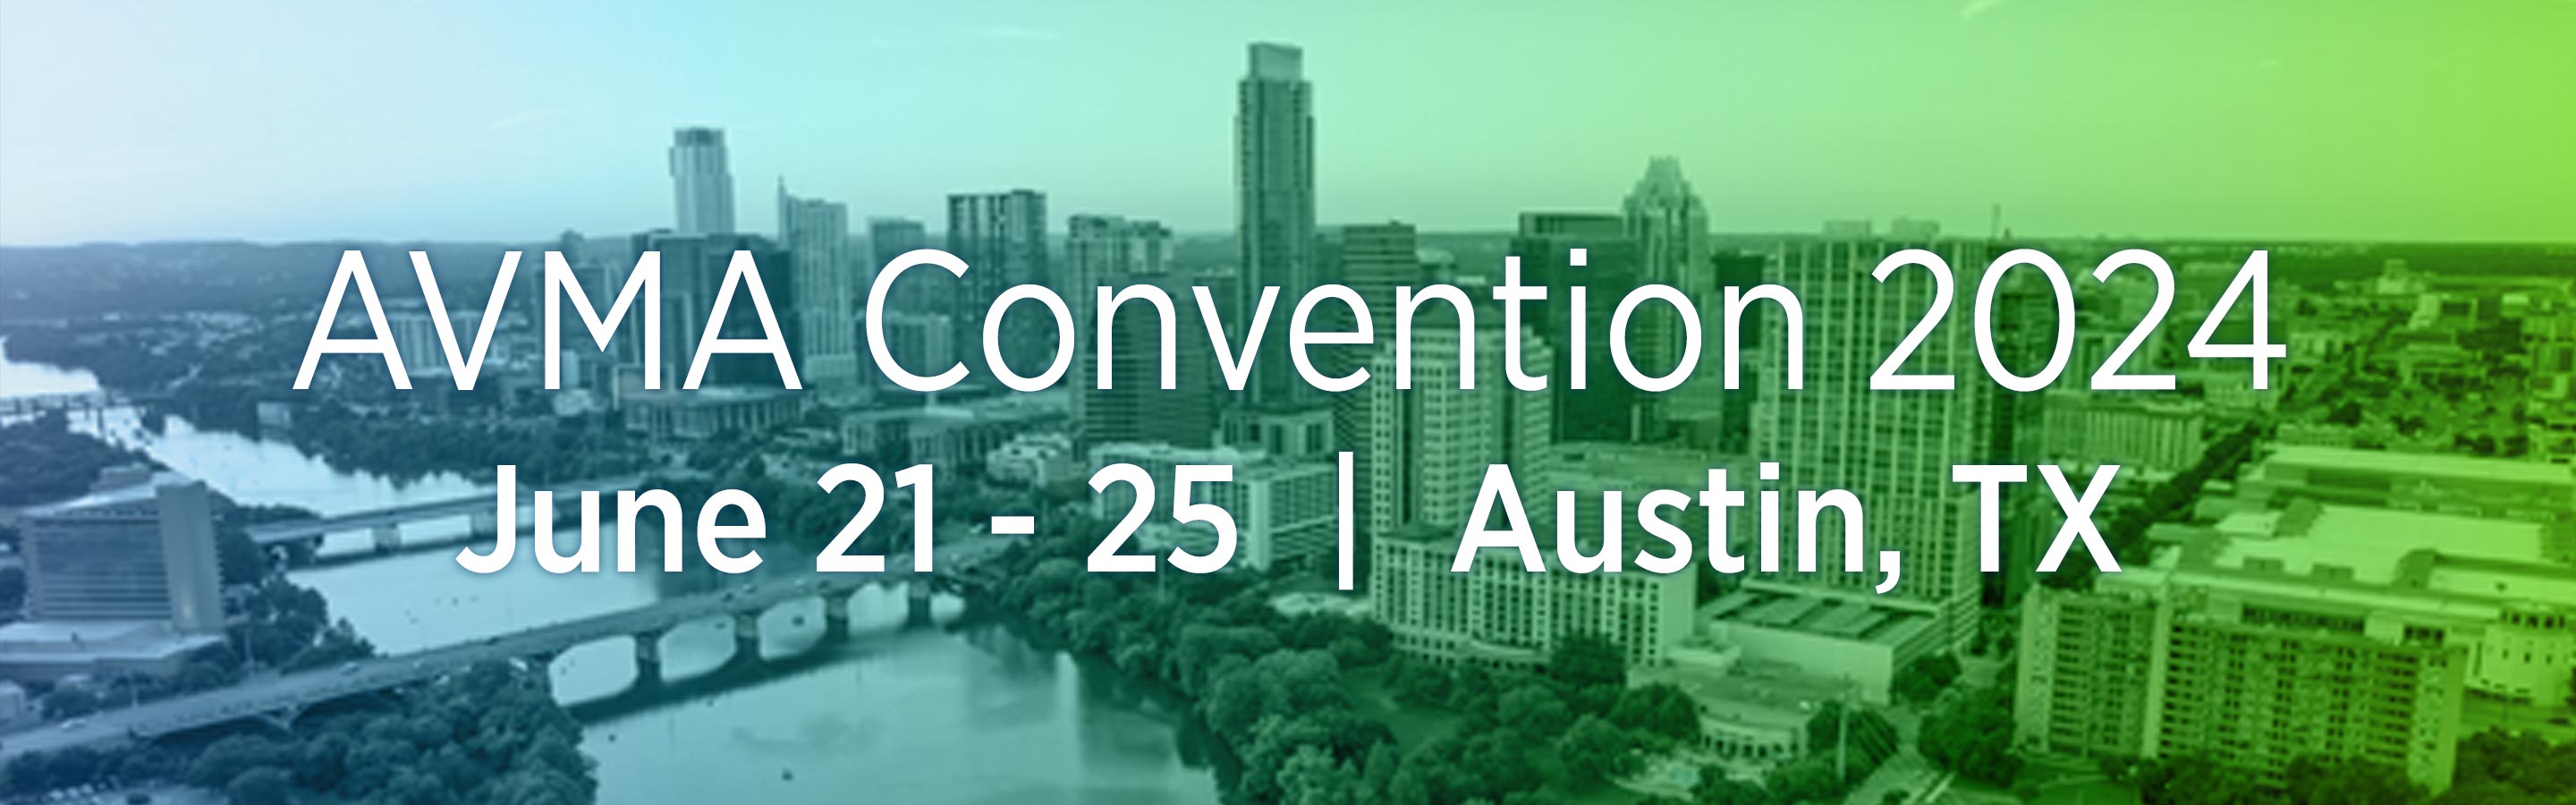 Registration is open! Join us in Austin for AVMA Convention 2024